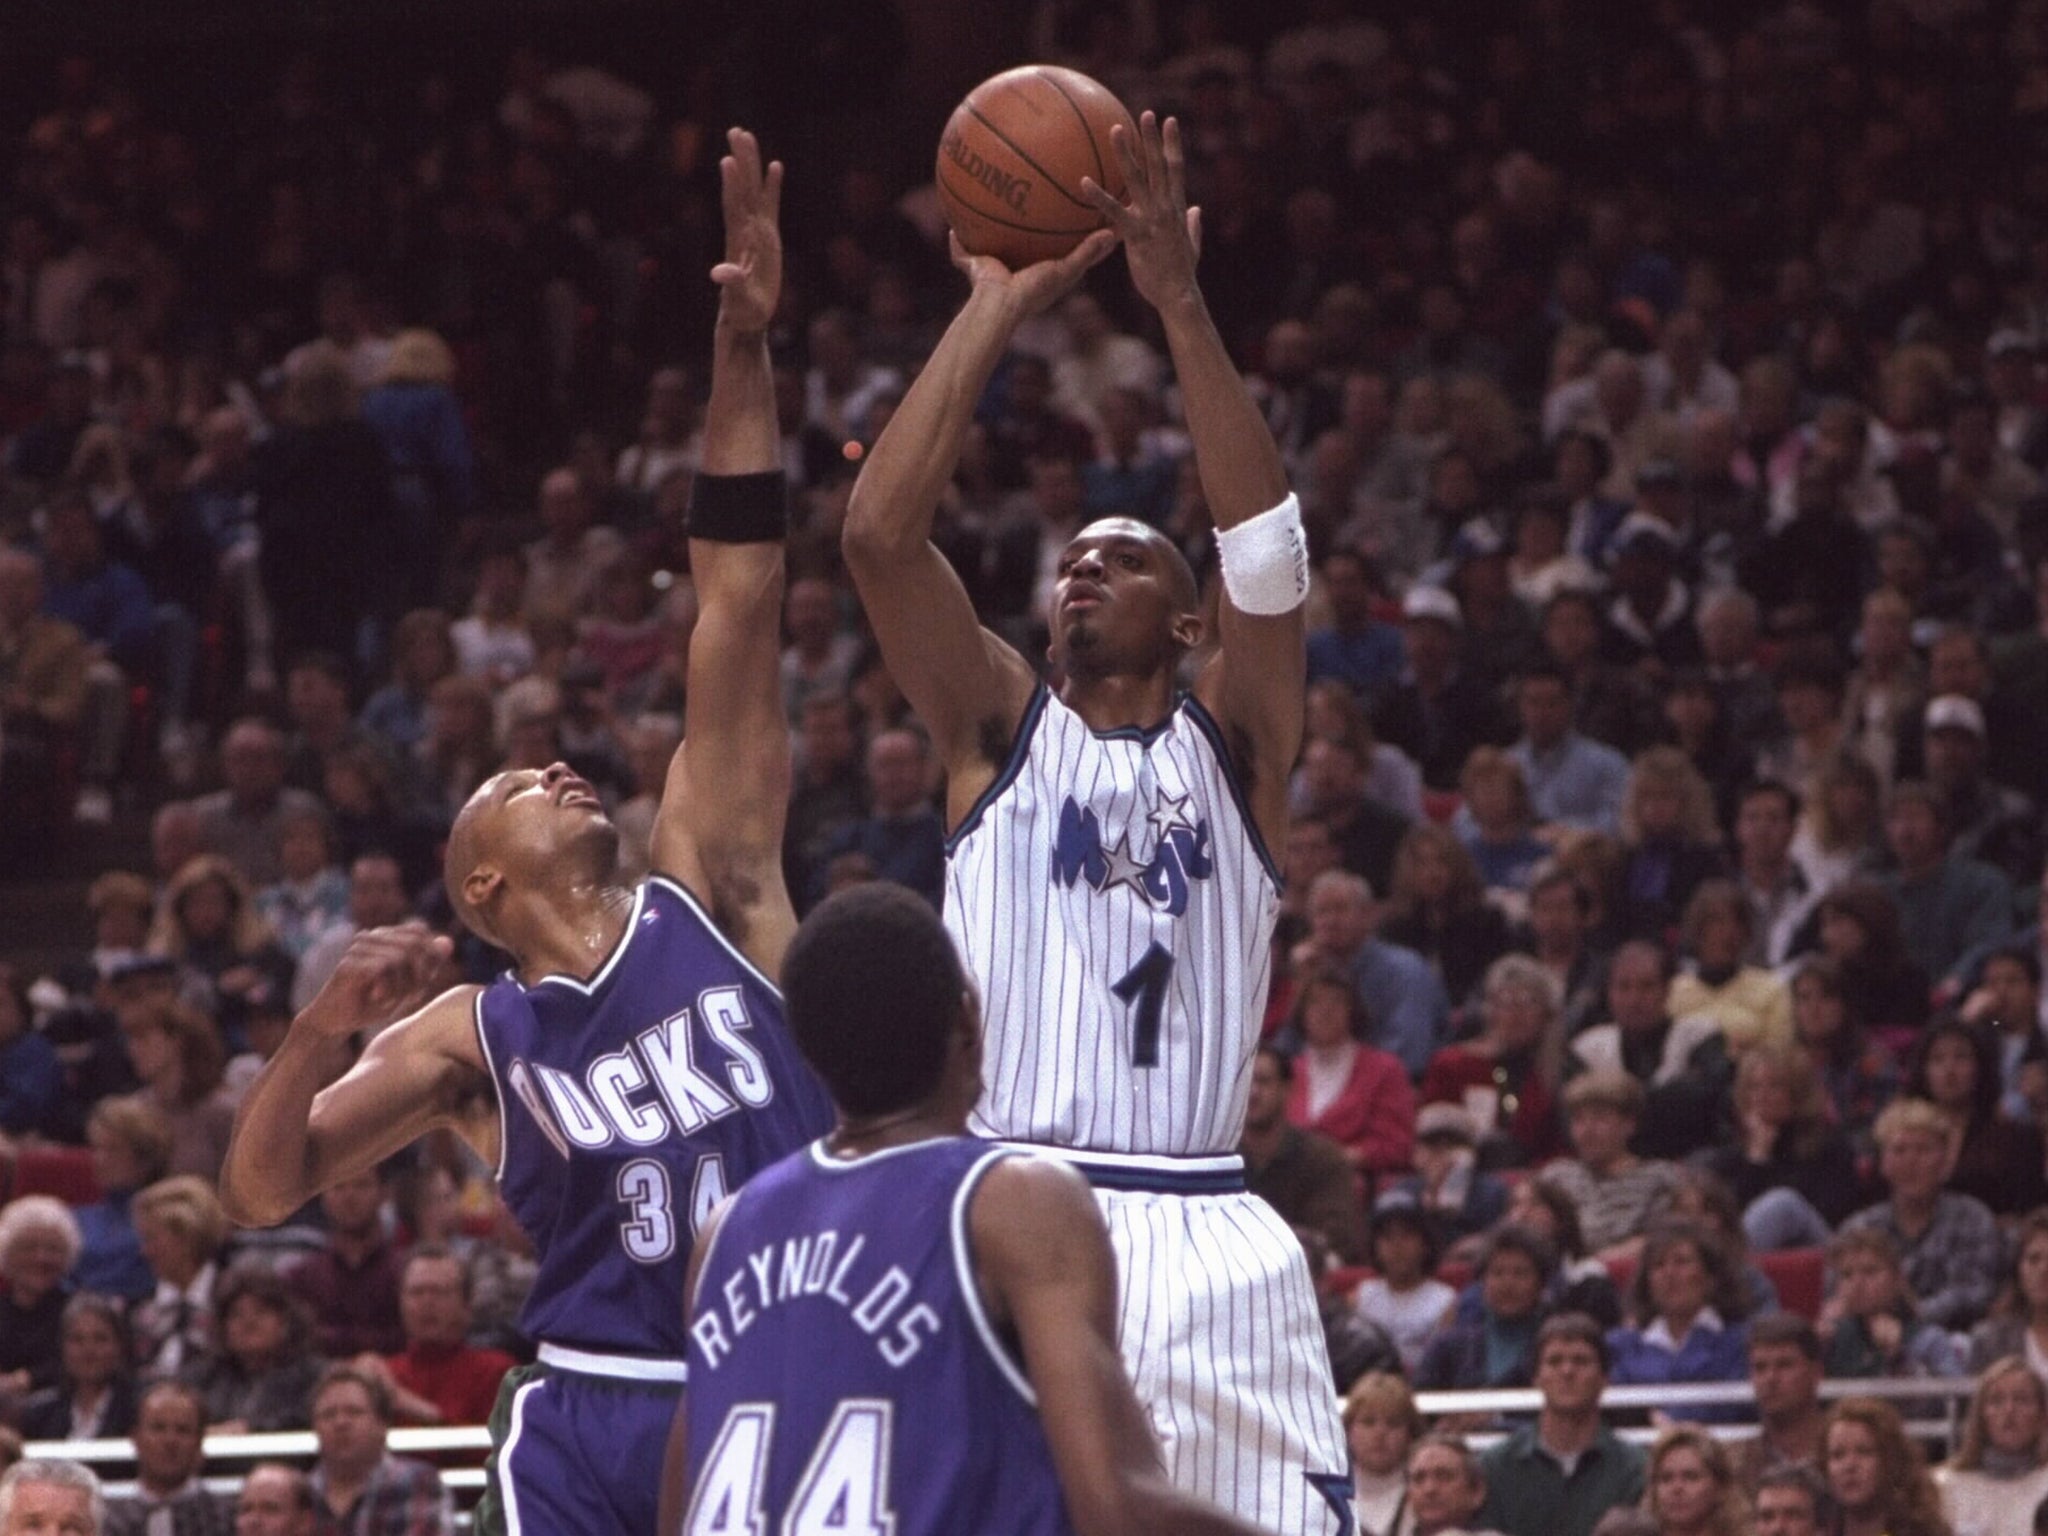 &#13;
Penny Hardaway was an All-Star four times in his first five seasons before injuries slowed him&#13;